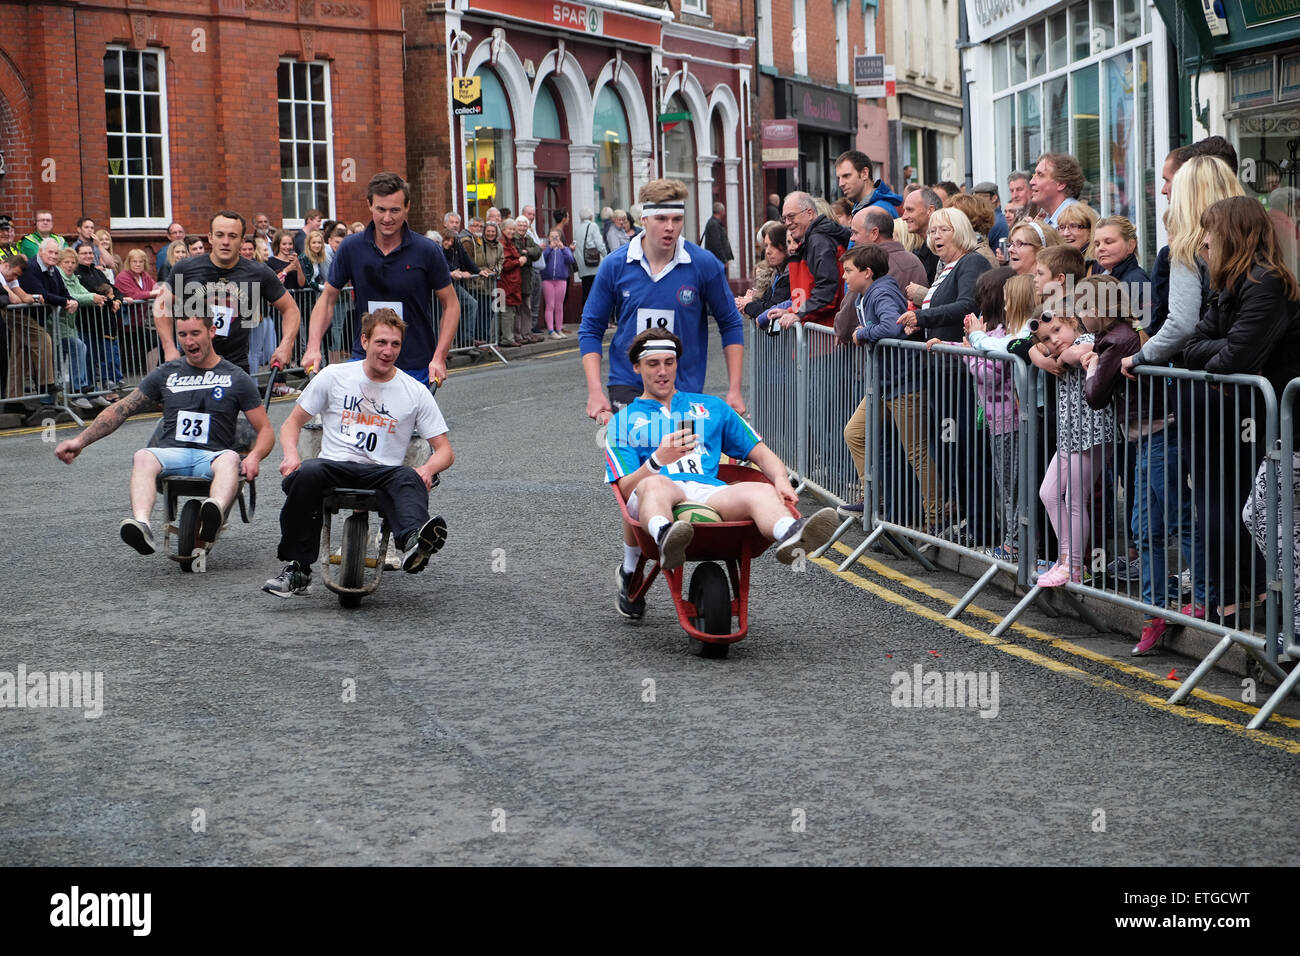 Kington, Herefordshire, UK. 13th June, 2015. Kington Festival Wheelbarrow Race competitors in this years 39th Wheelbarrow Race raced around town stopping to drink at each pub en route. Here three teams race through the town centre past the crowds. Stock Photo